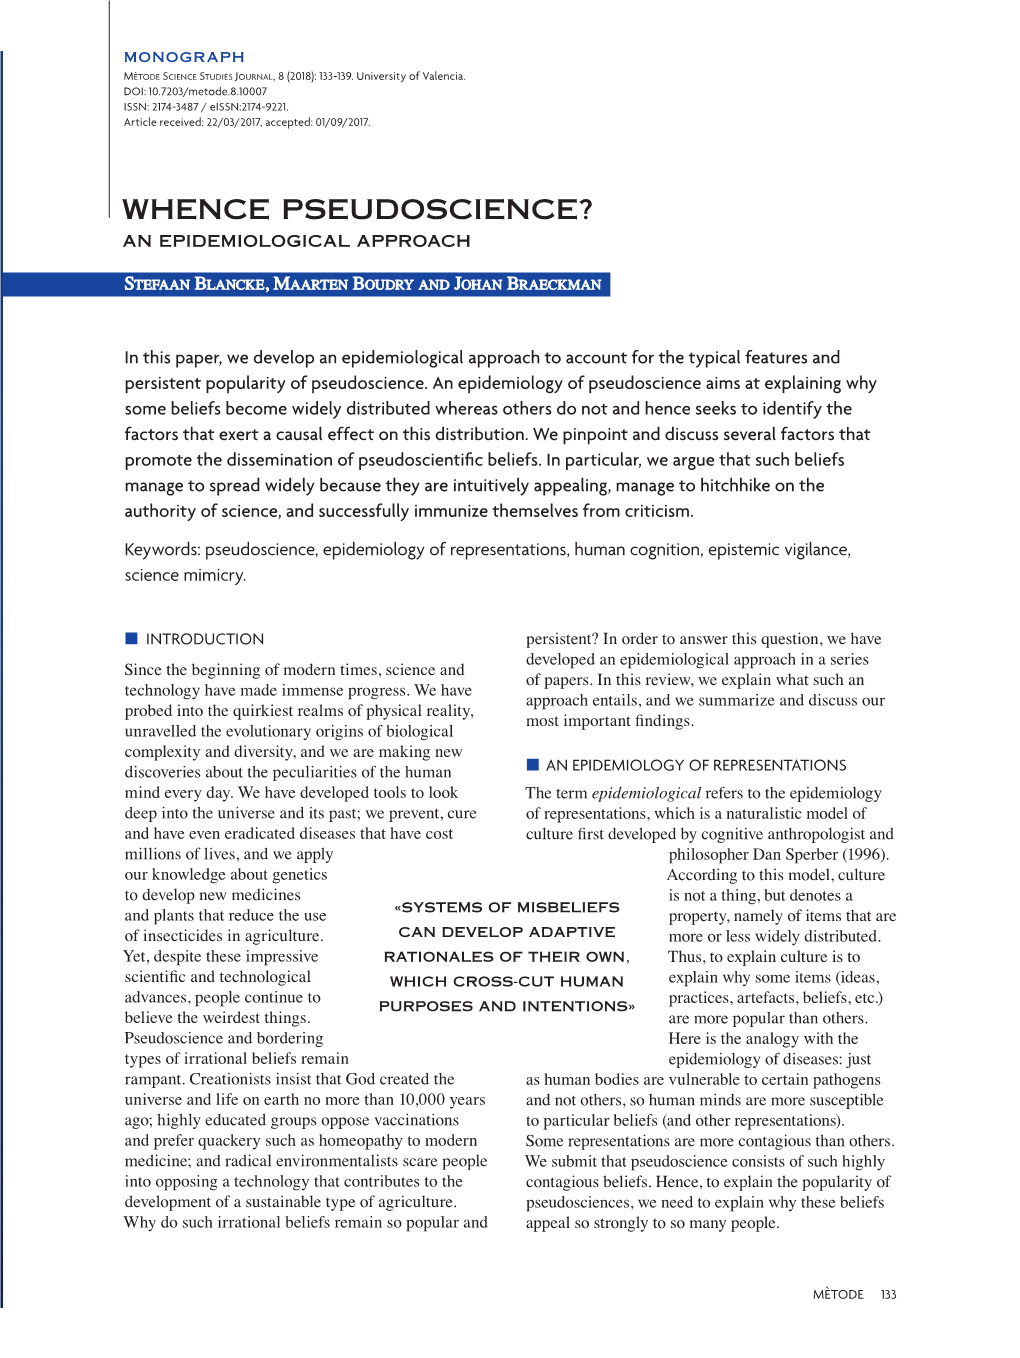 Whence Pseudoscience? an Epidemiological Approach